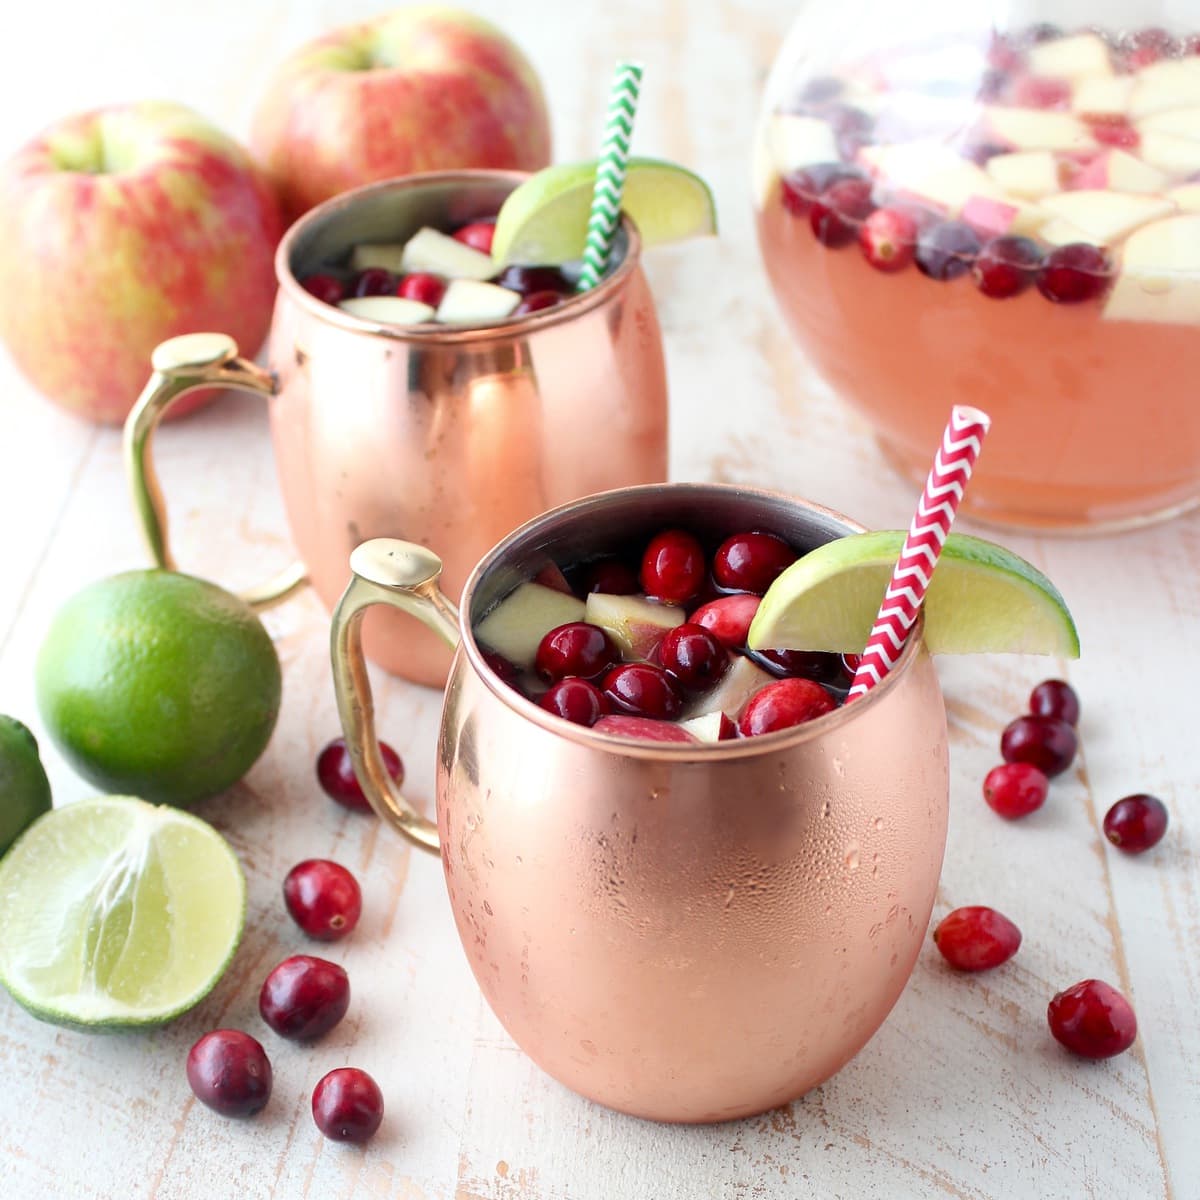 https://whitneybond.com/wp-content/uploads/2016/11/Cranberry-Apple-Moscow-Mule-Punch-11.jpg